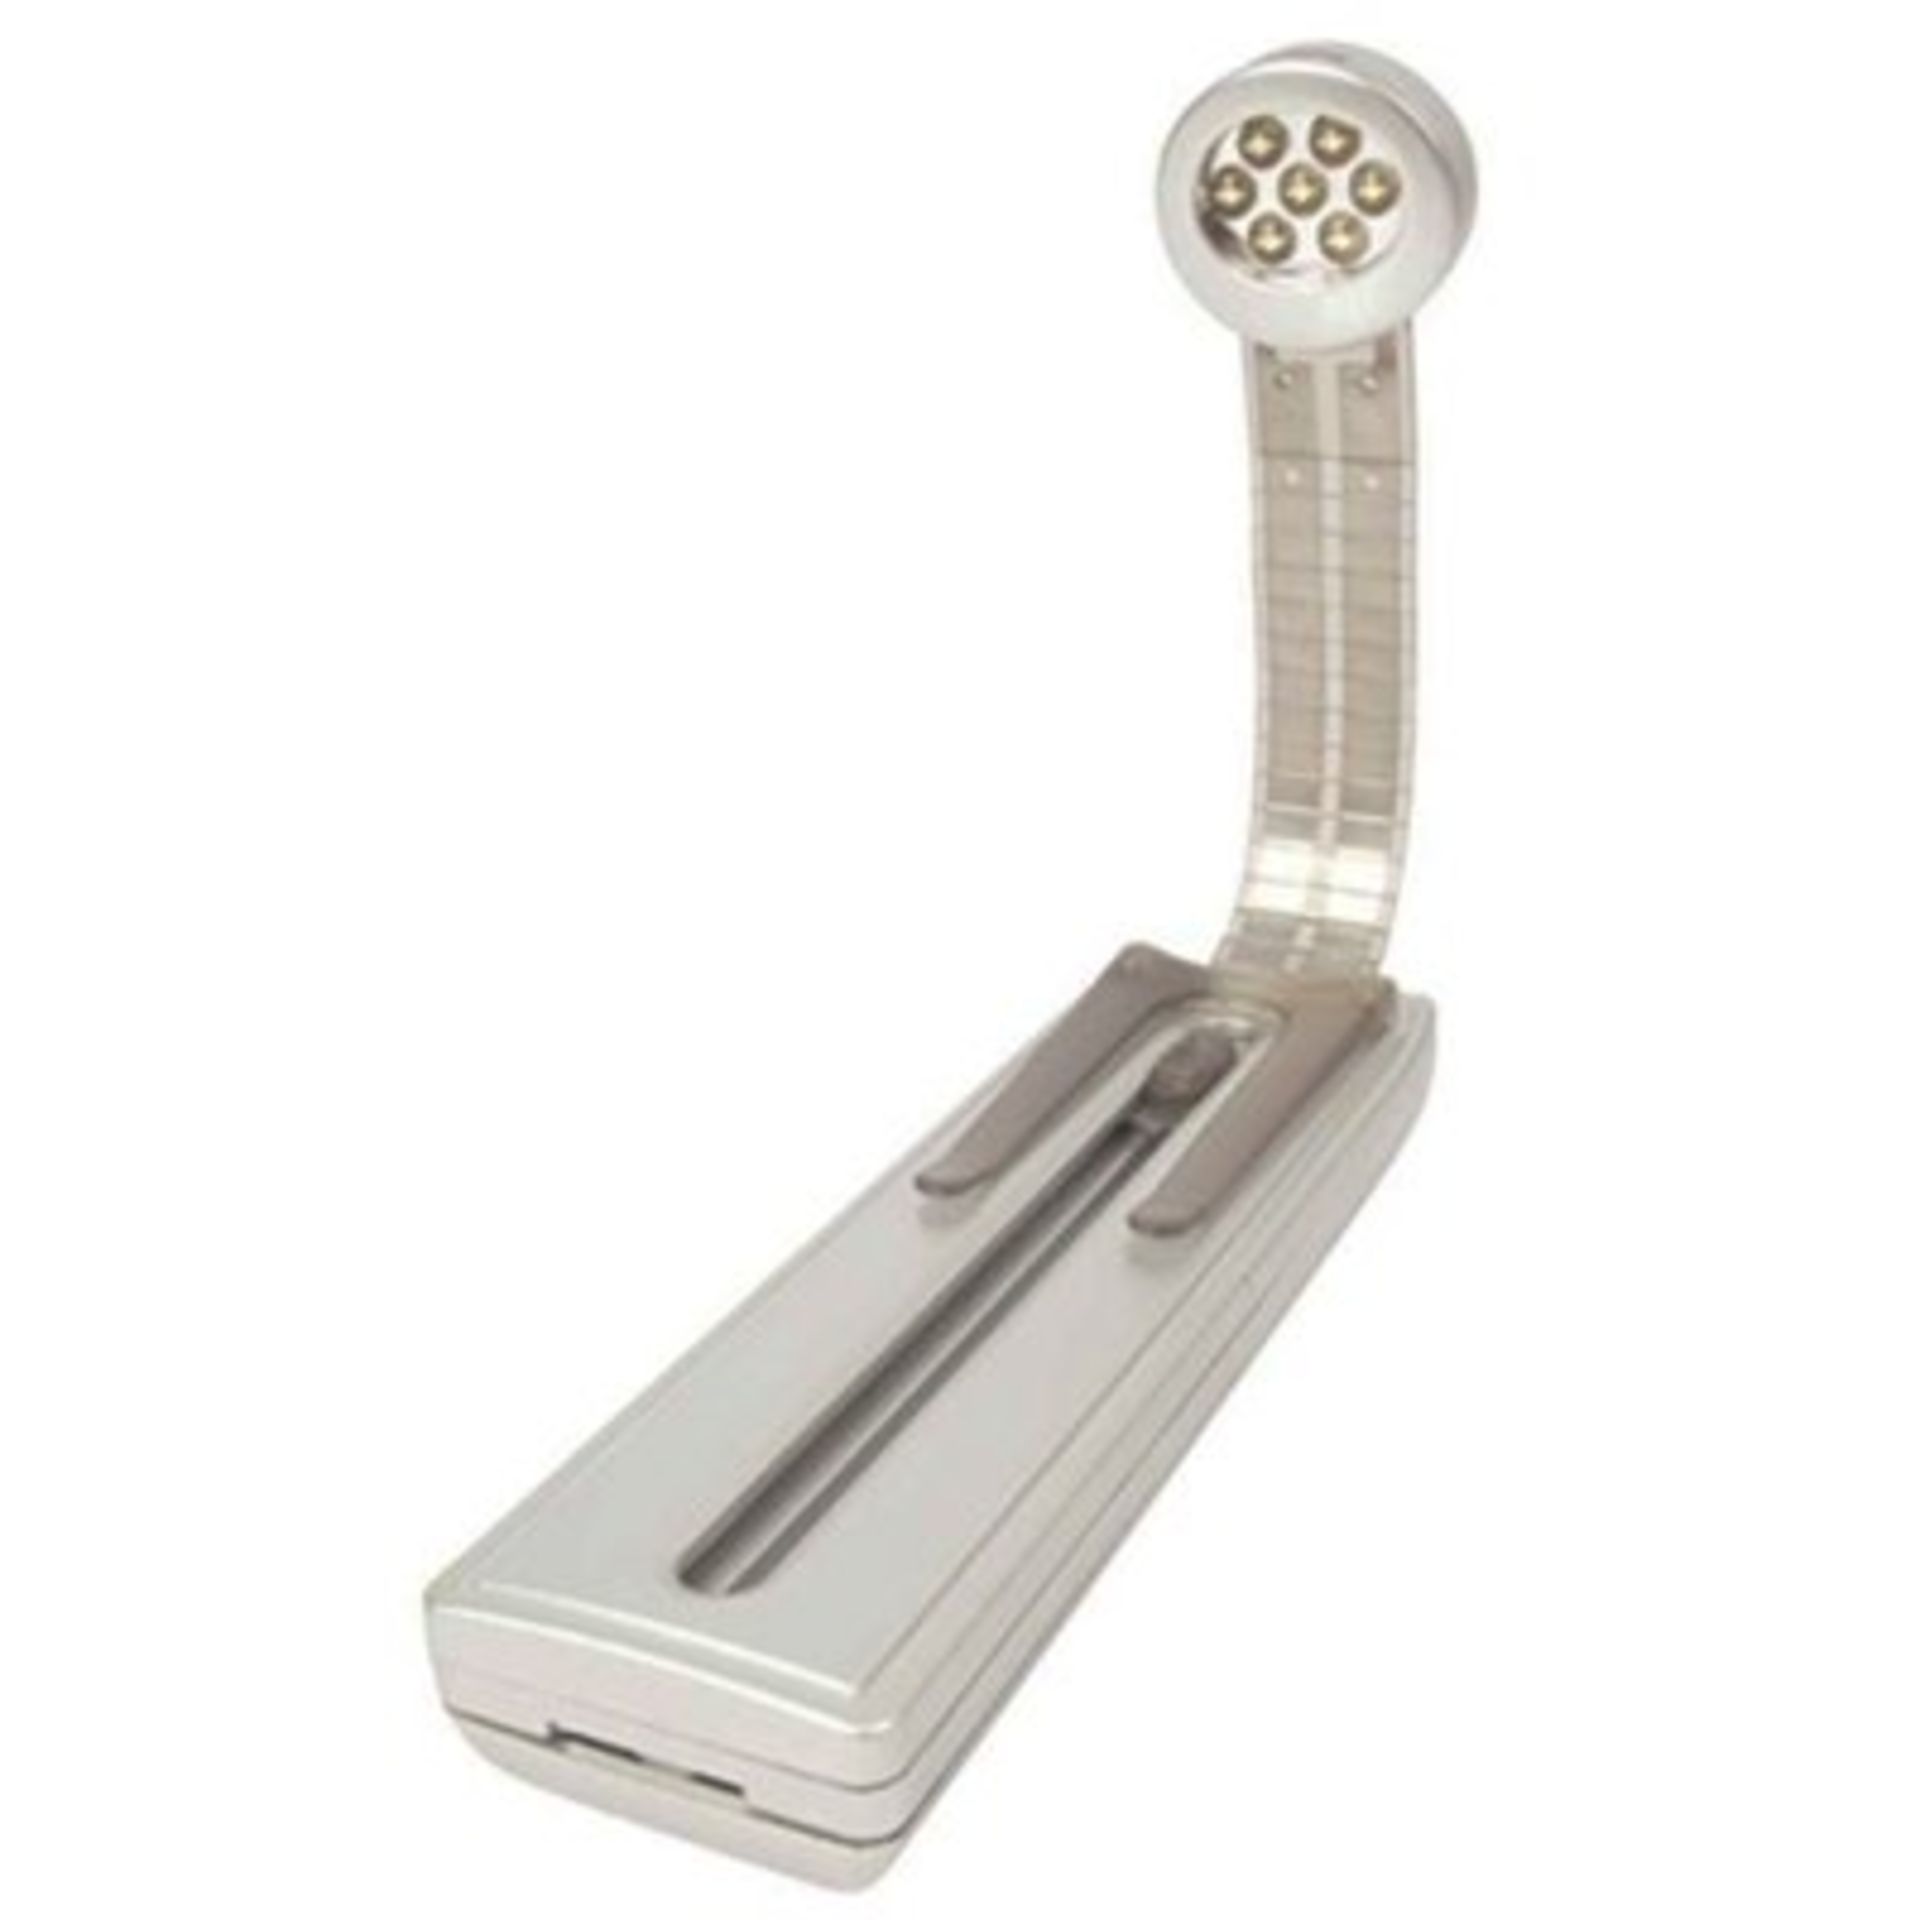 V *TRADE QTY* Brand New Tritronic 7 LED Reading Light With Clip & Stand X 5 YOUR BID PRICE TO BE - Image 2 of 2